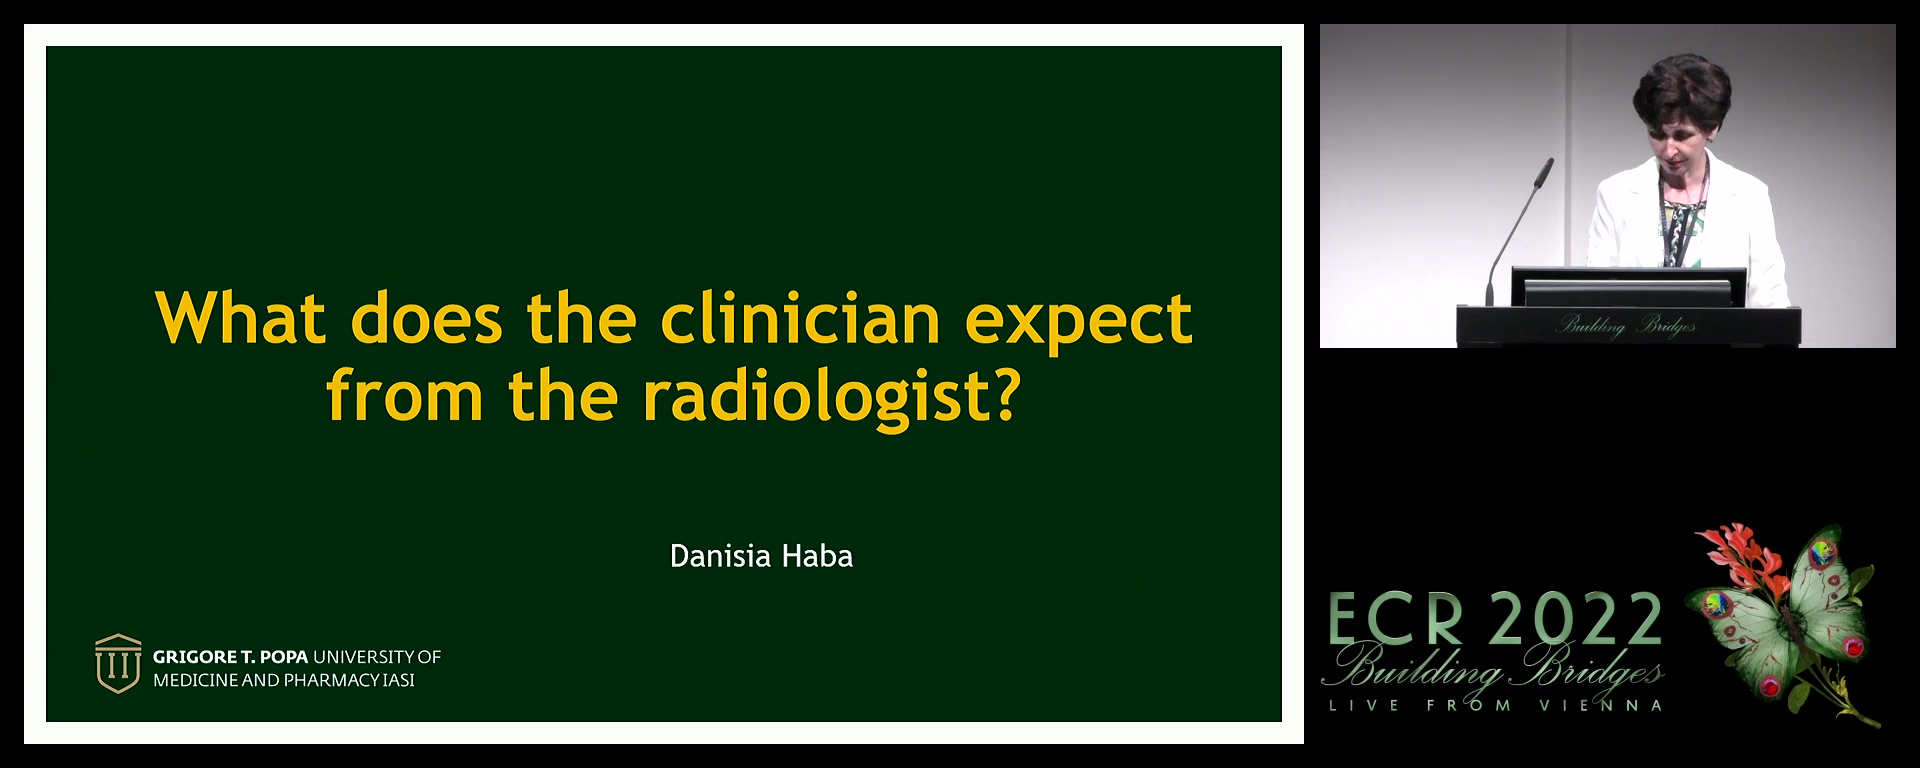 What does the clinician expect from the radiologist?